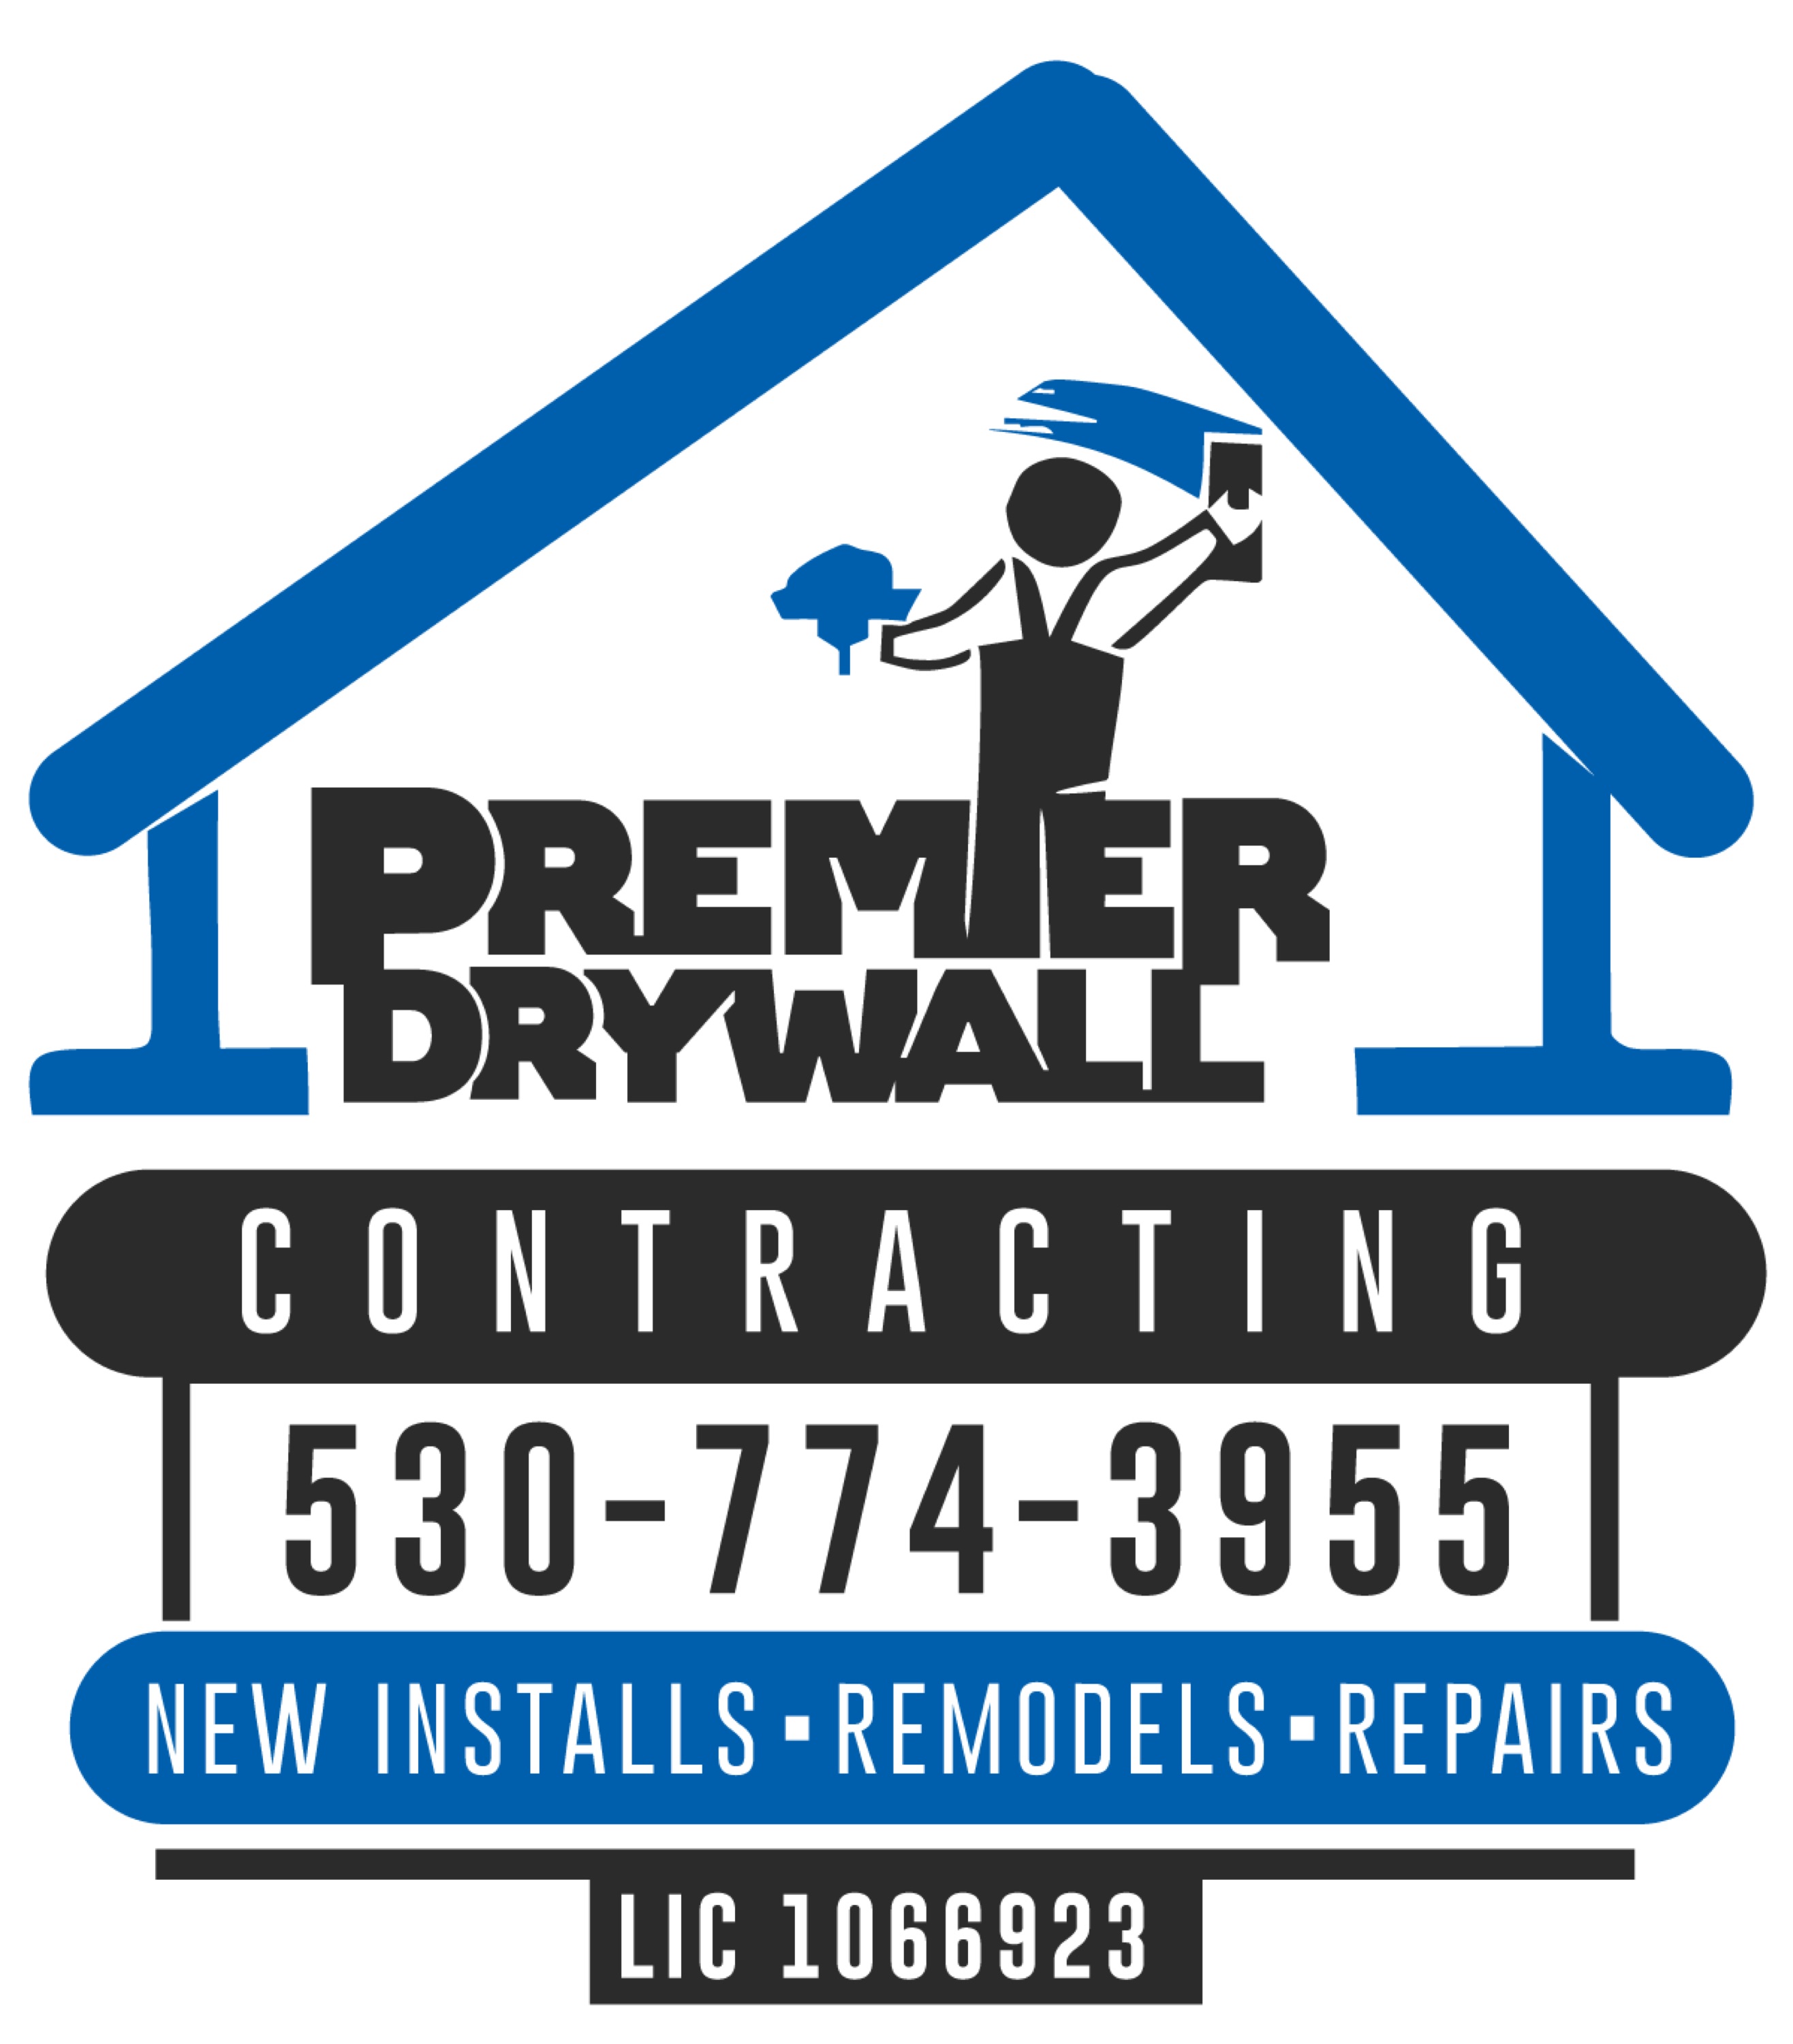 Premier Drywall Contracting Logo